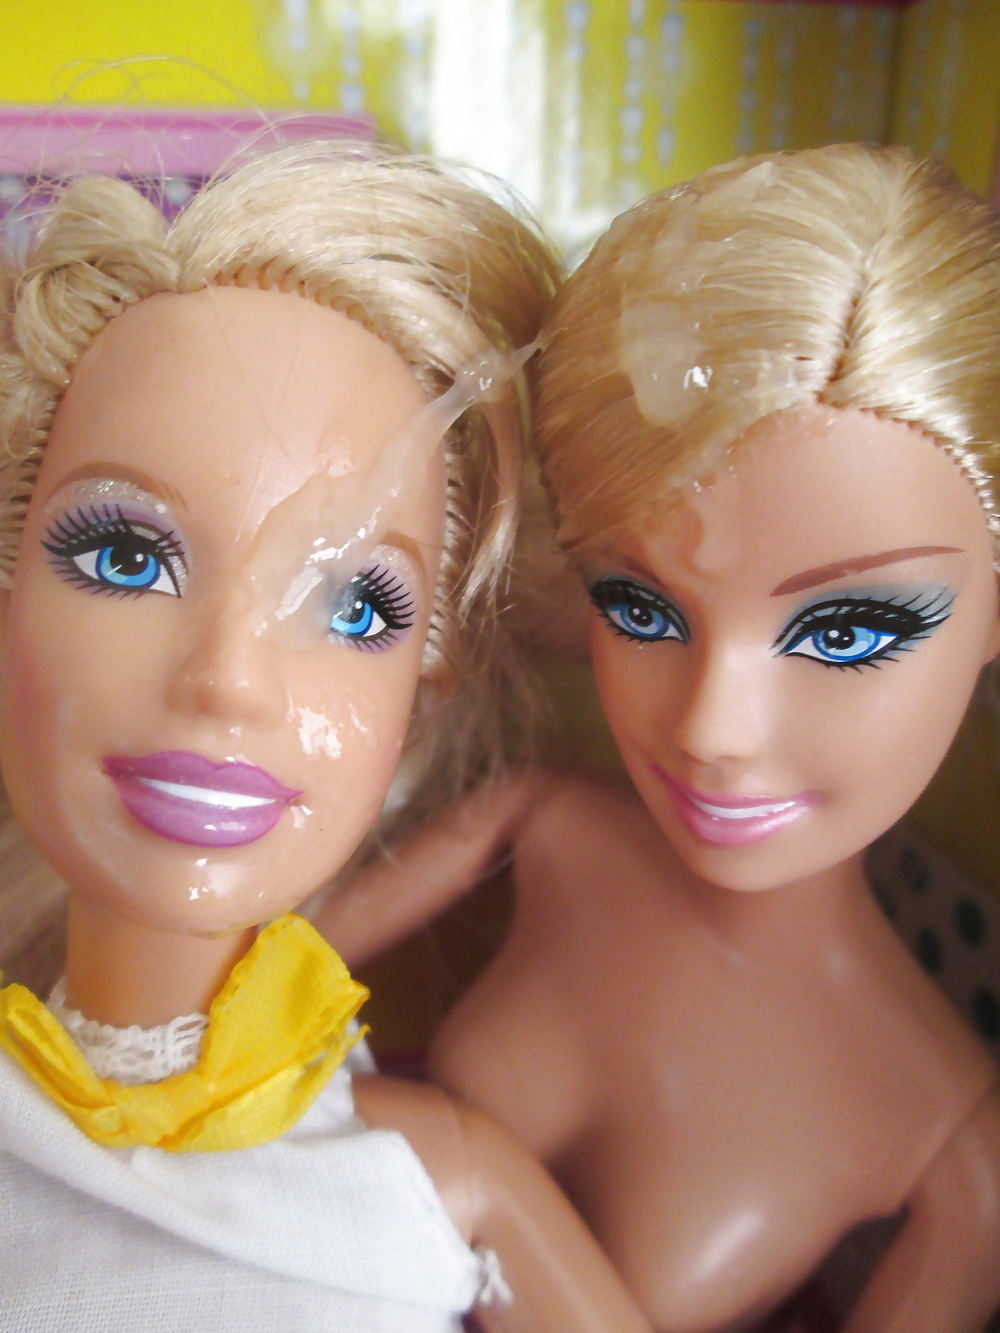 Twin Barbie sisters share a snack #40384068